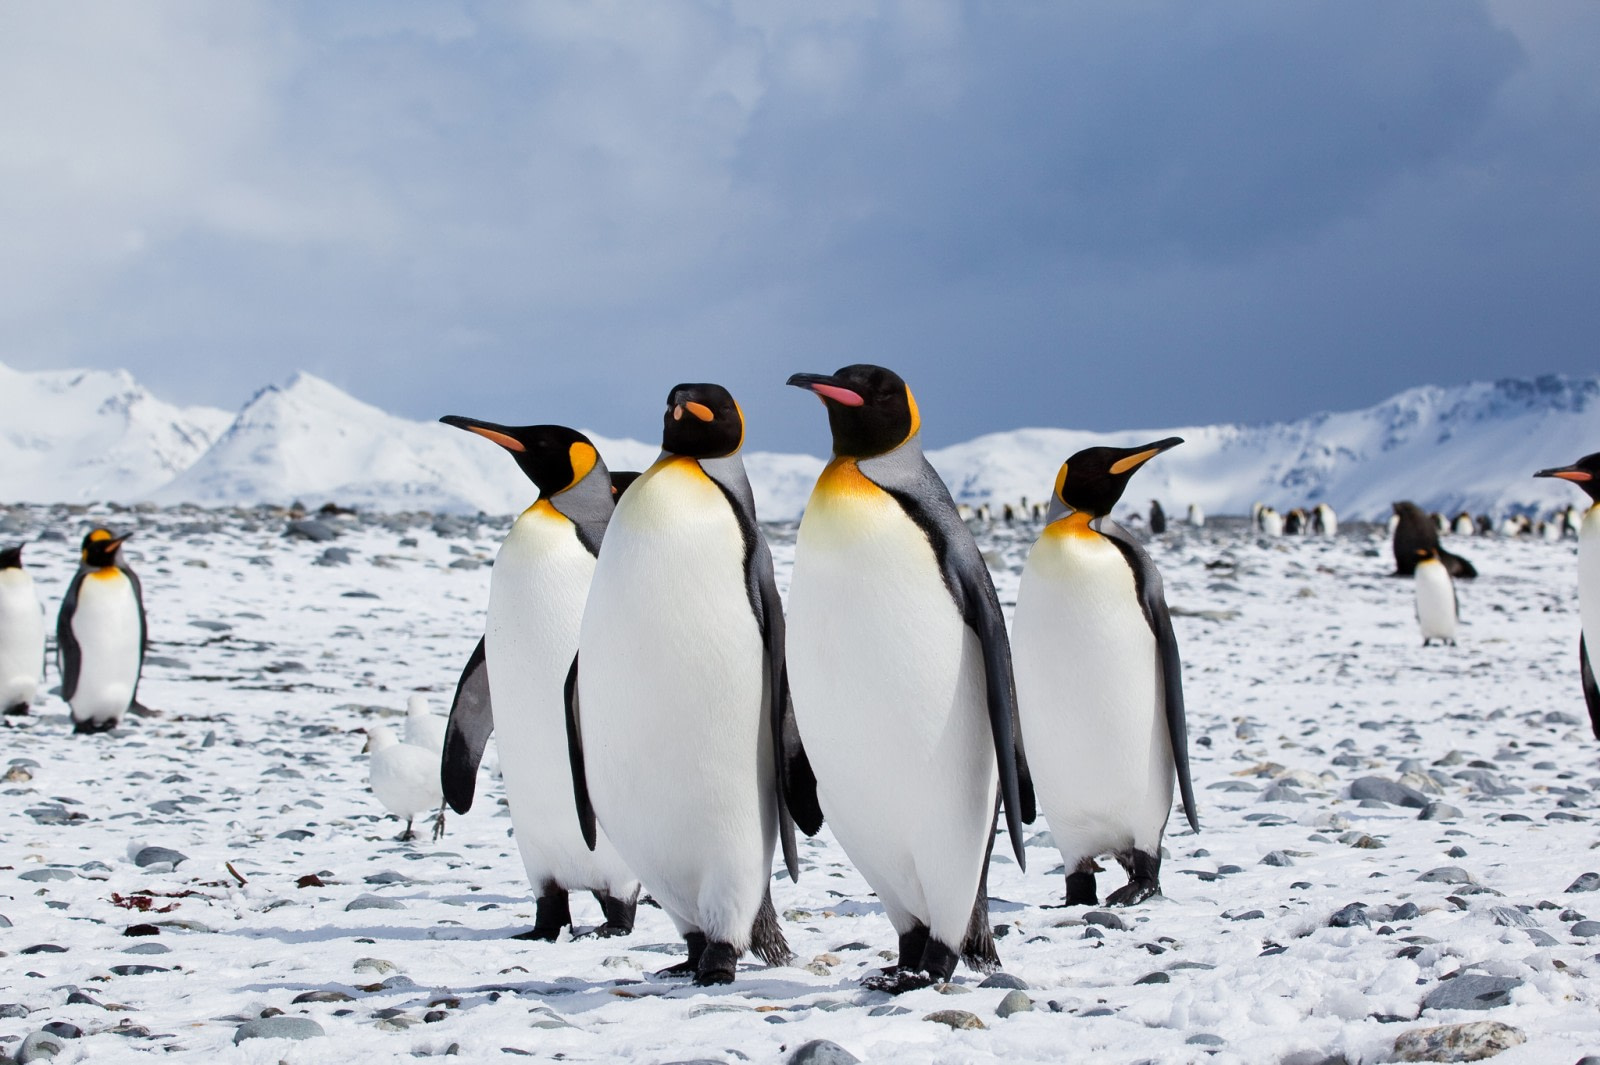 King Penguins walking around in a snowy area